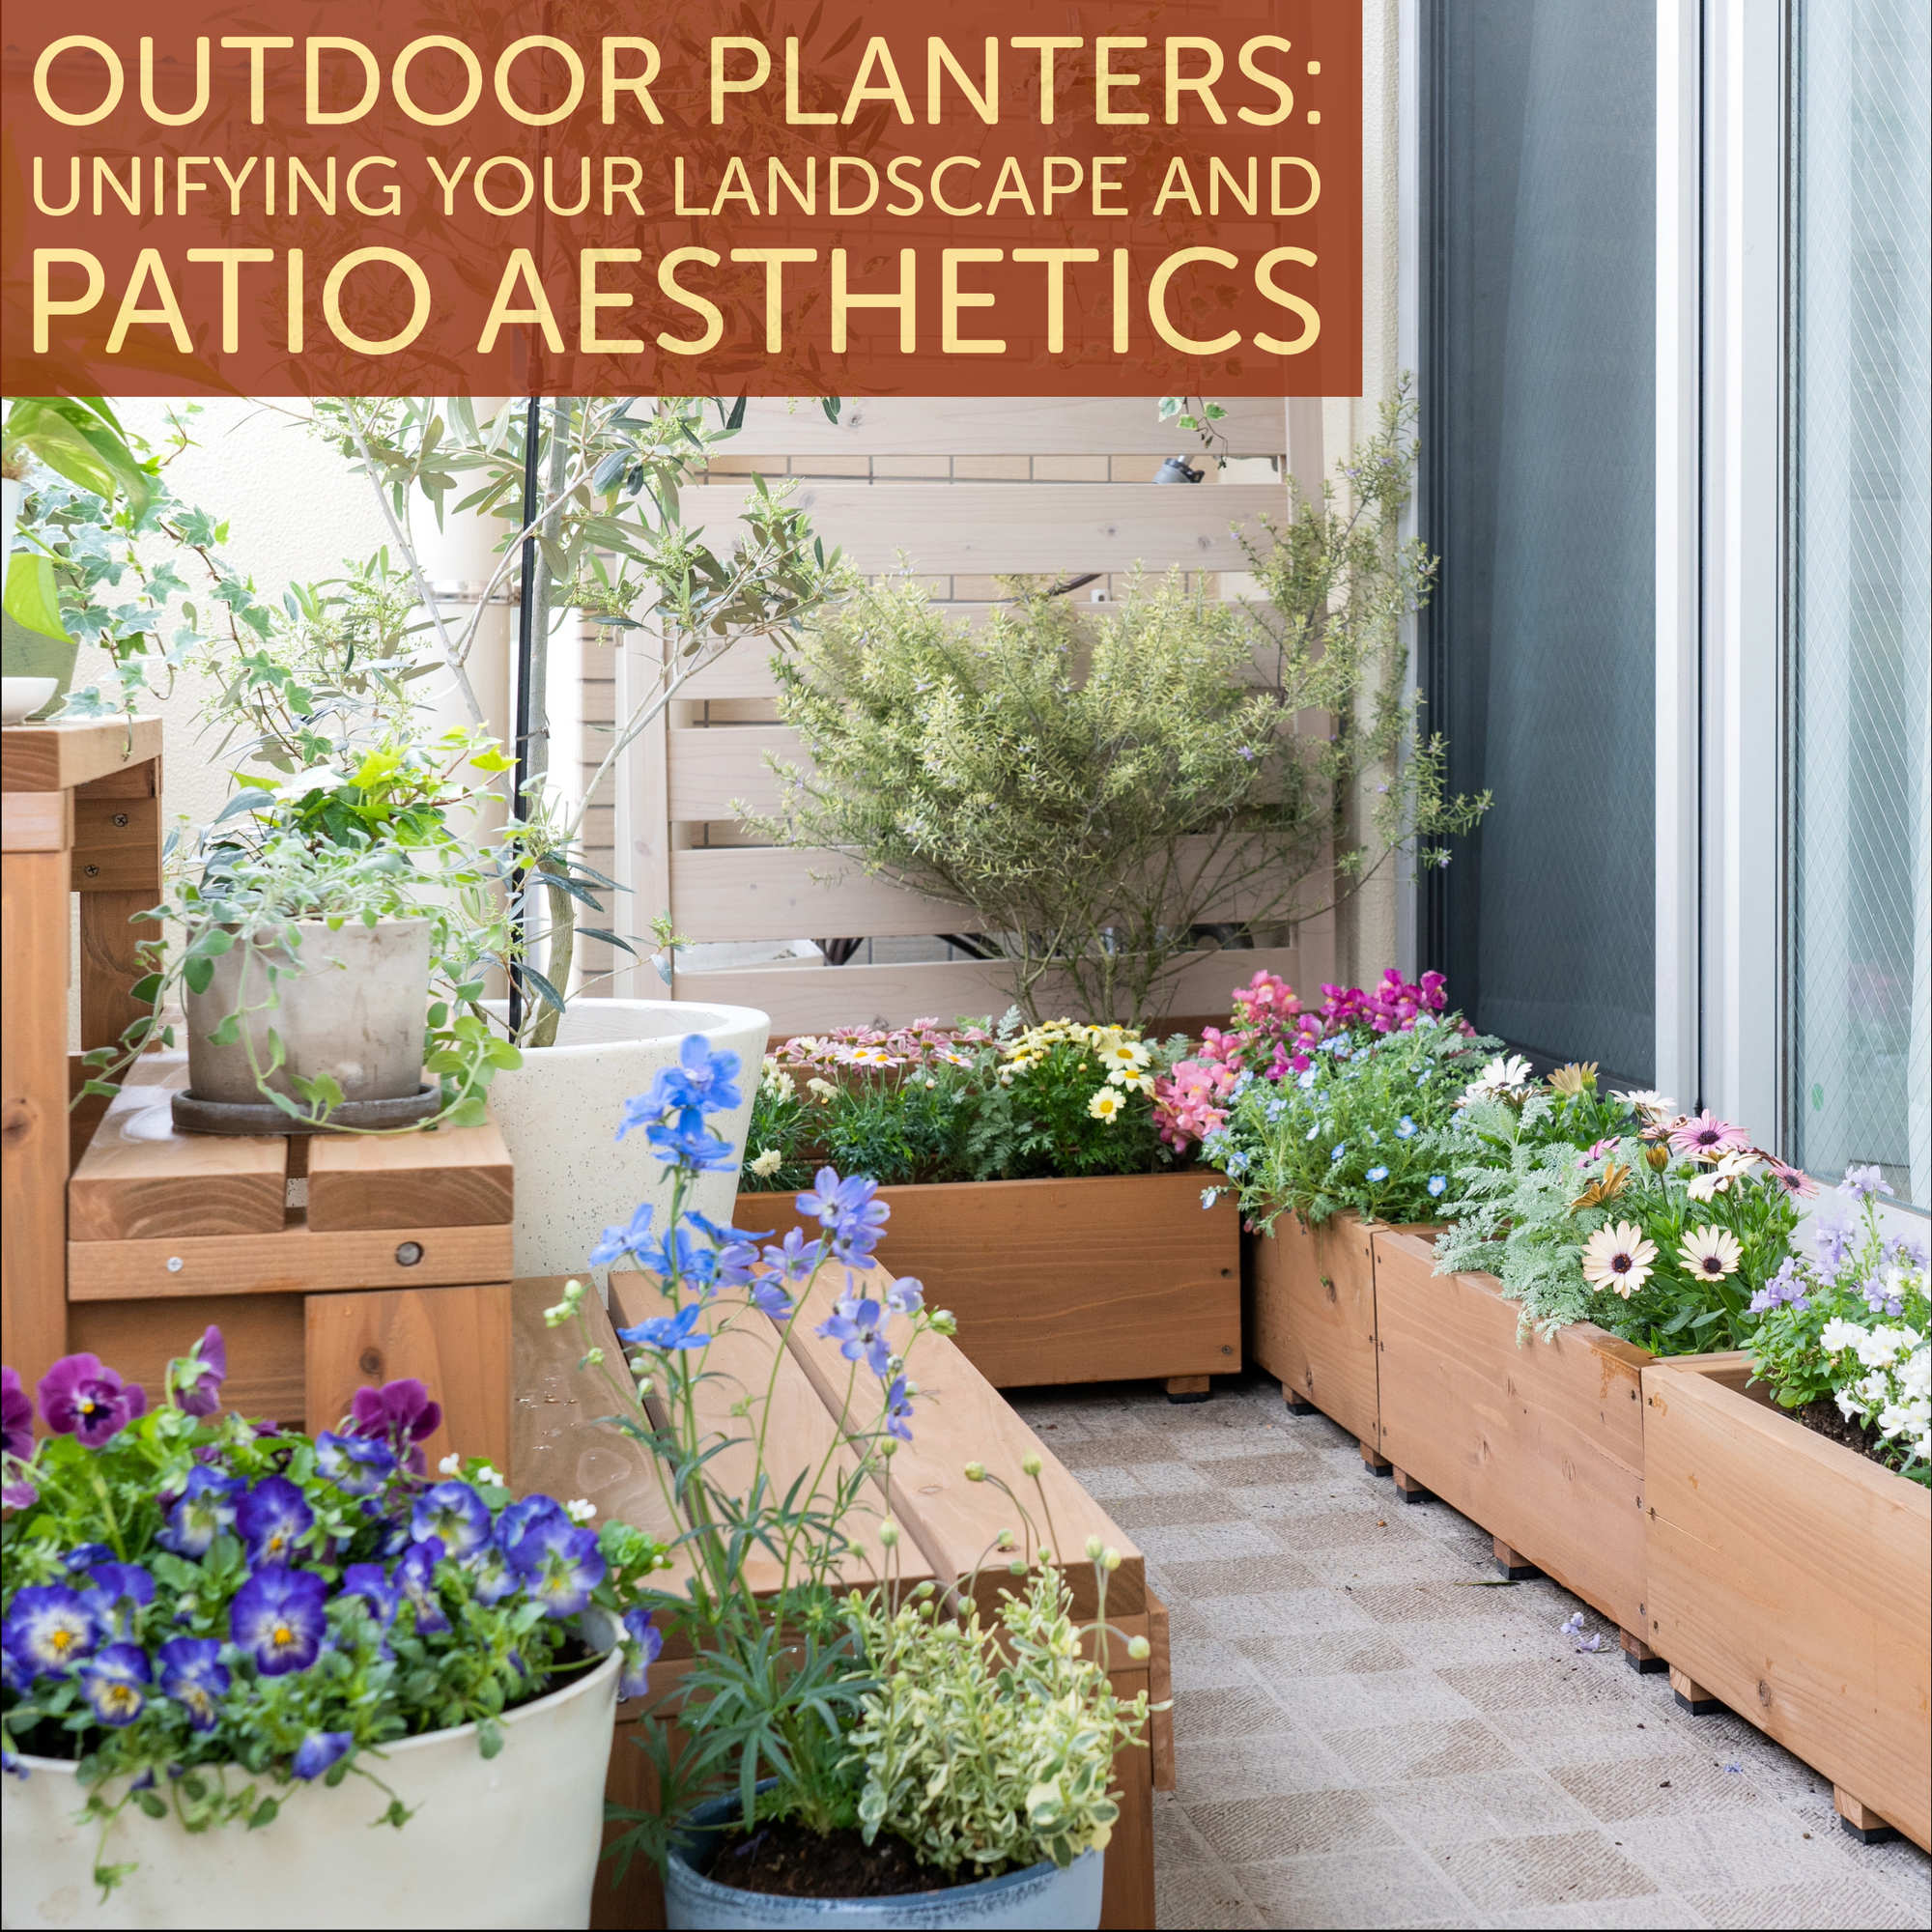 Outdoor Planters: Unifying Your Landscape and Patio Aesthetics